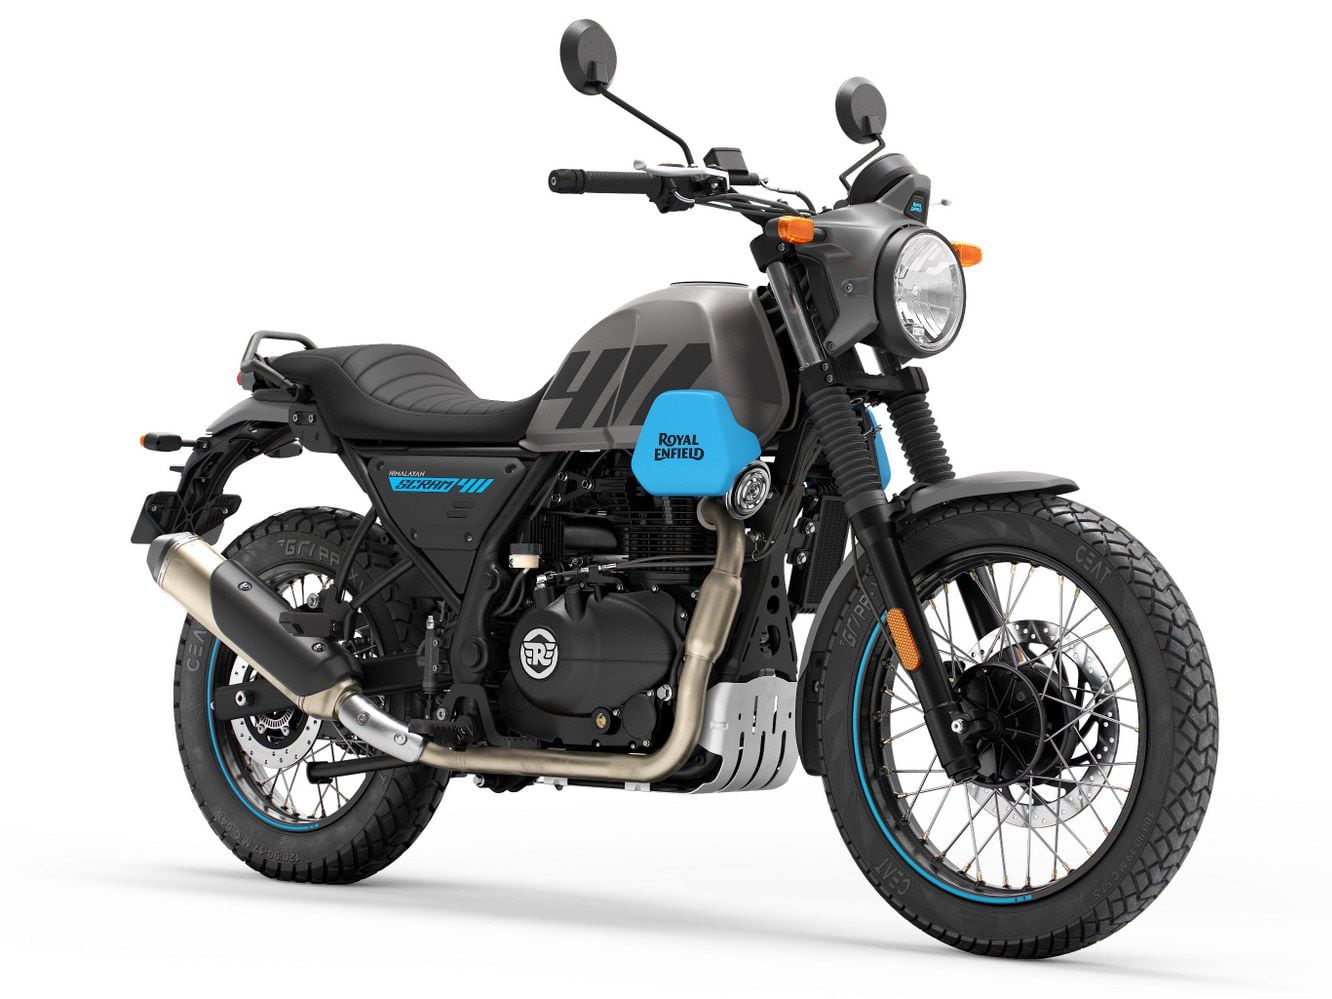 The Scram betrays its casual off-road intent with a skid plate, fork gaiters, and semi-knobbies. The base model here shown in the Graphite Blue option.